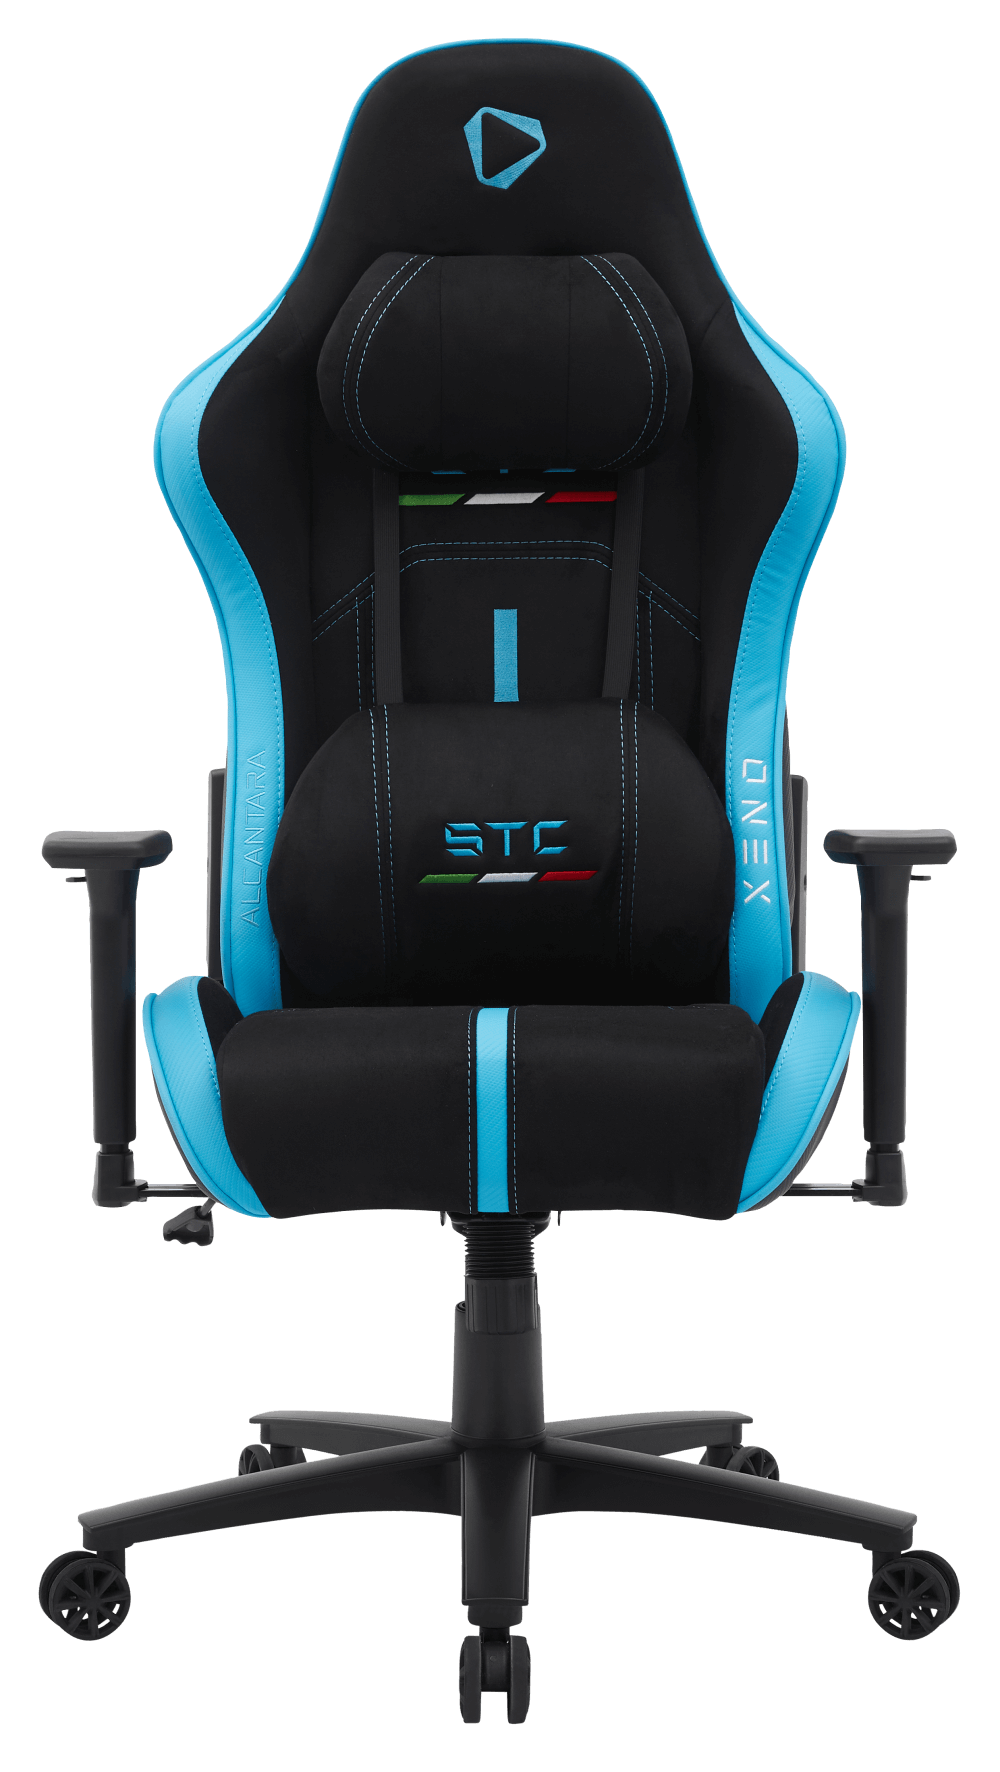  ONEX-STC ALCANTARA Gaming /Office Chair - Black/Blue<BR><fONT COLOR='RED'>In-Store Pickup Not Available - Delivery Only (Freight Charges Apply)  